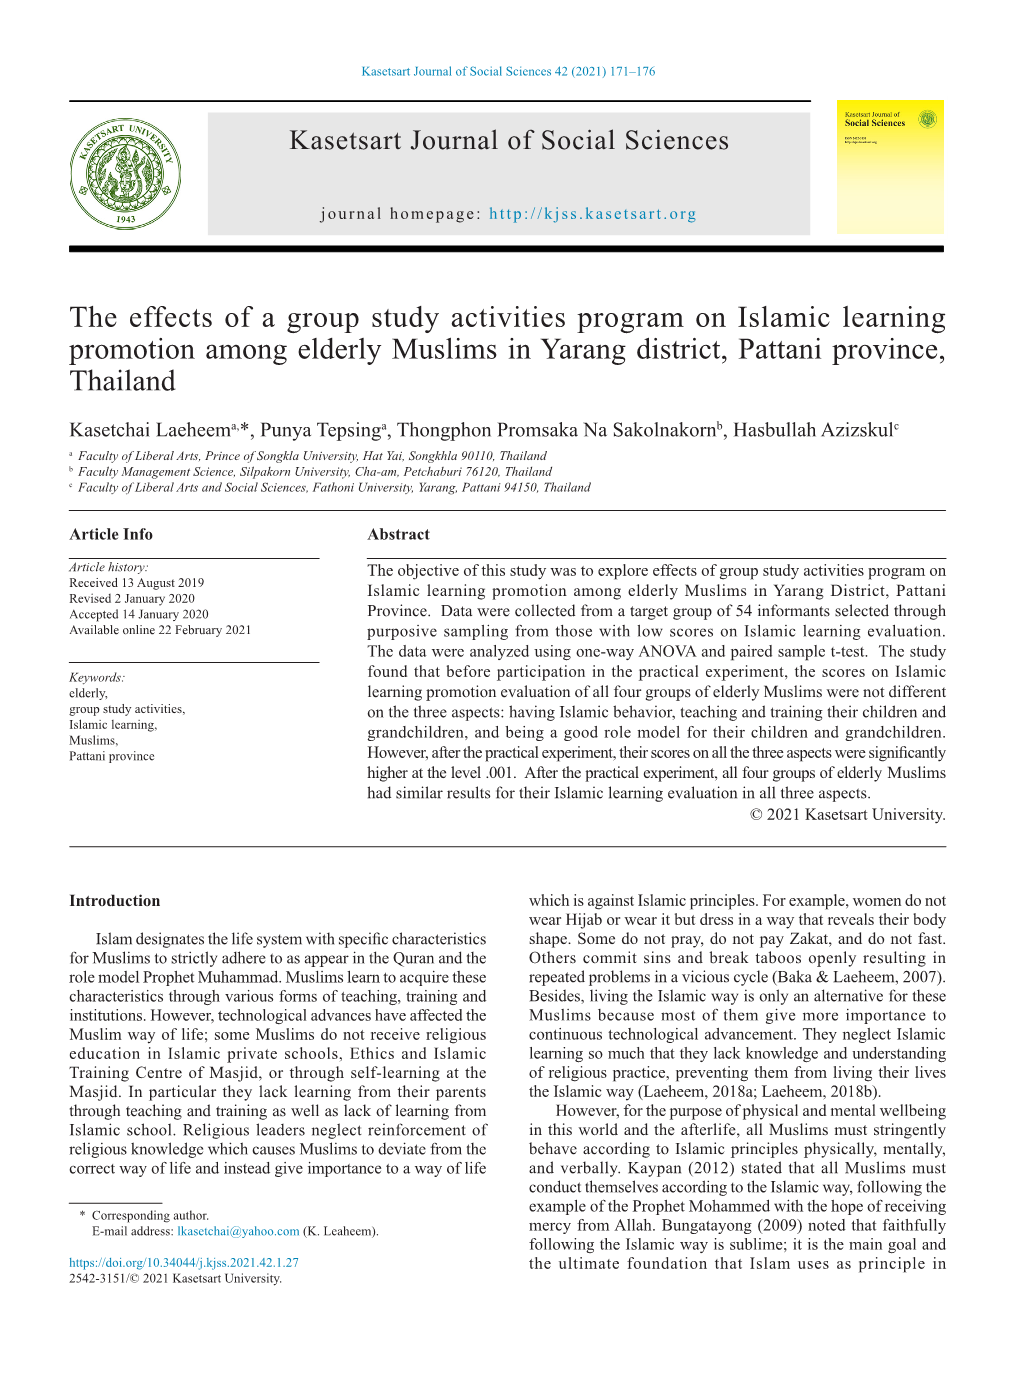 The Effects of a Group Study Activities Program on Islamic Learning Promotion Among Elderly Muslims in Yarang District, Pattani Province, Thailand